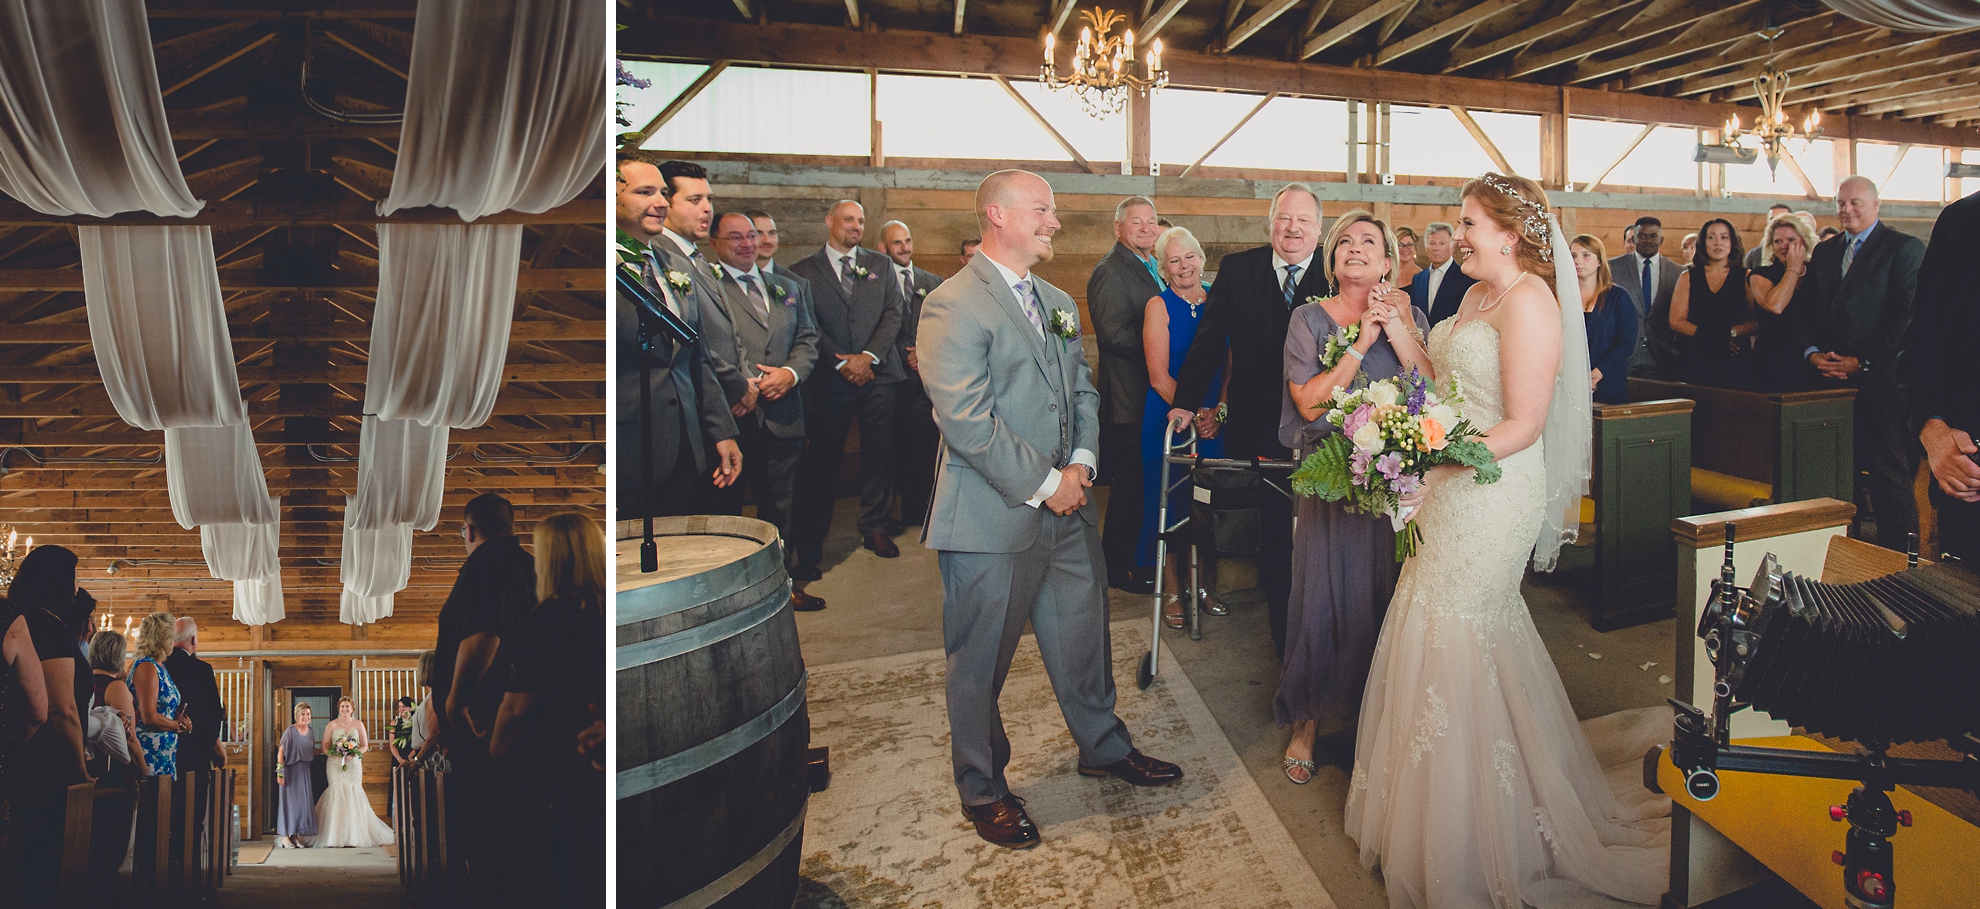 mother escorts bride up aisle during wedding ceremony at Hayloft in the Grove in Buffalo, NY